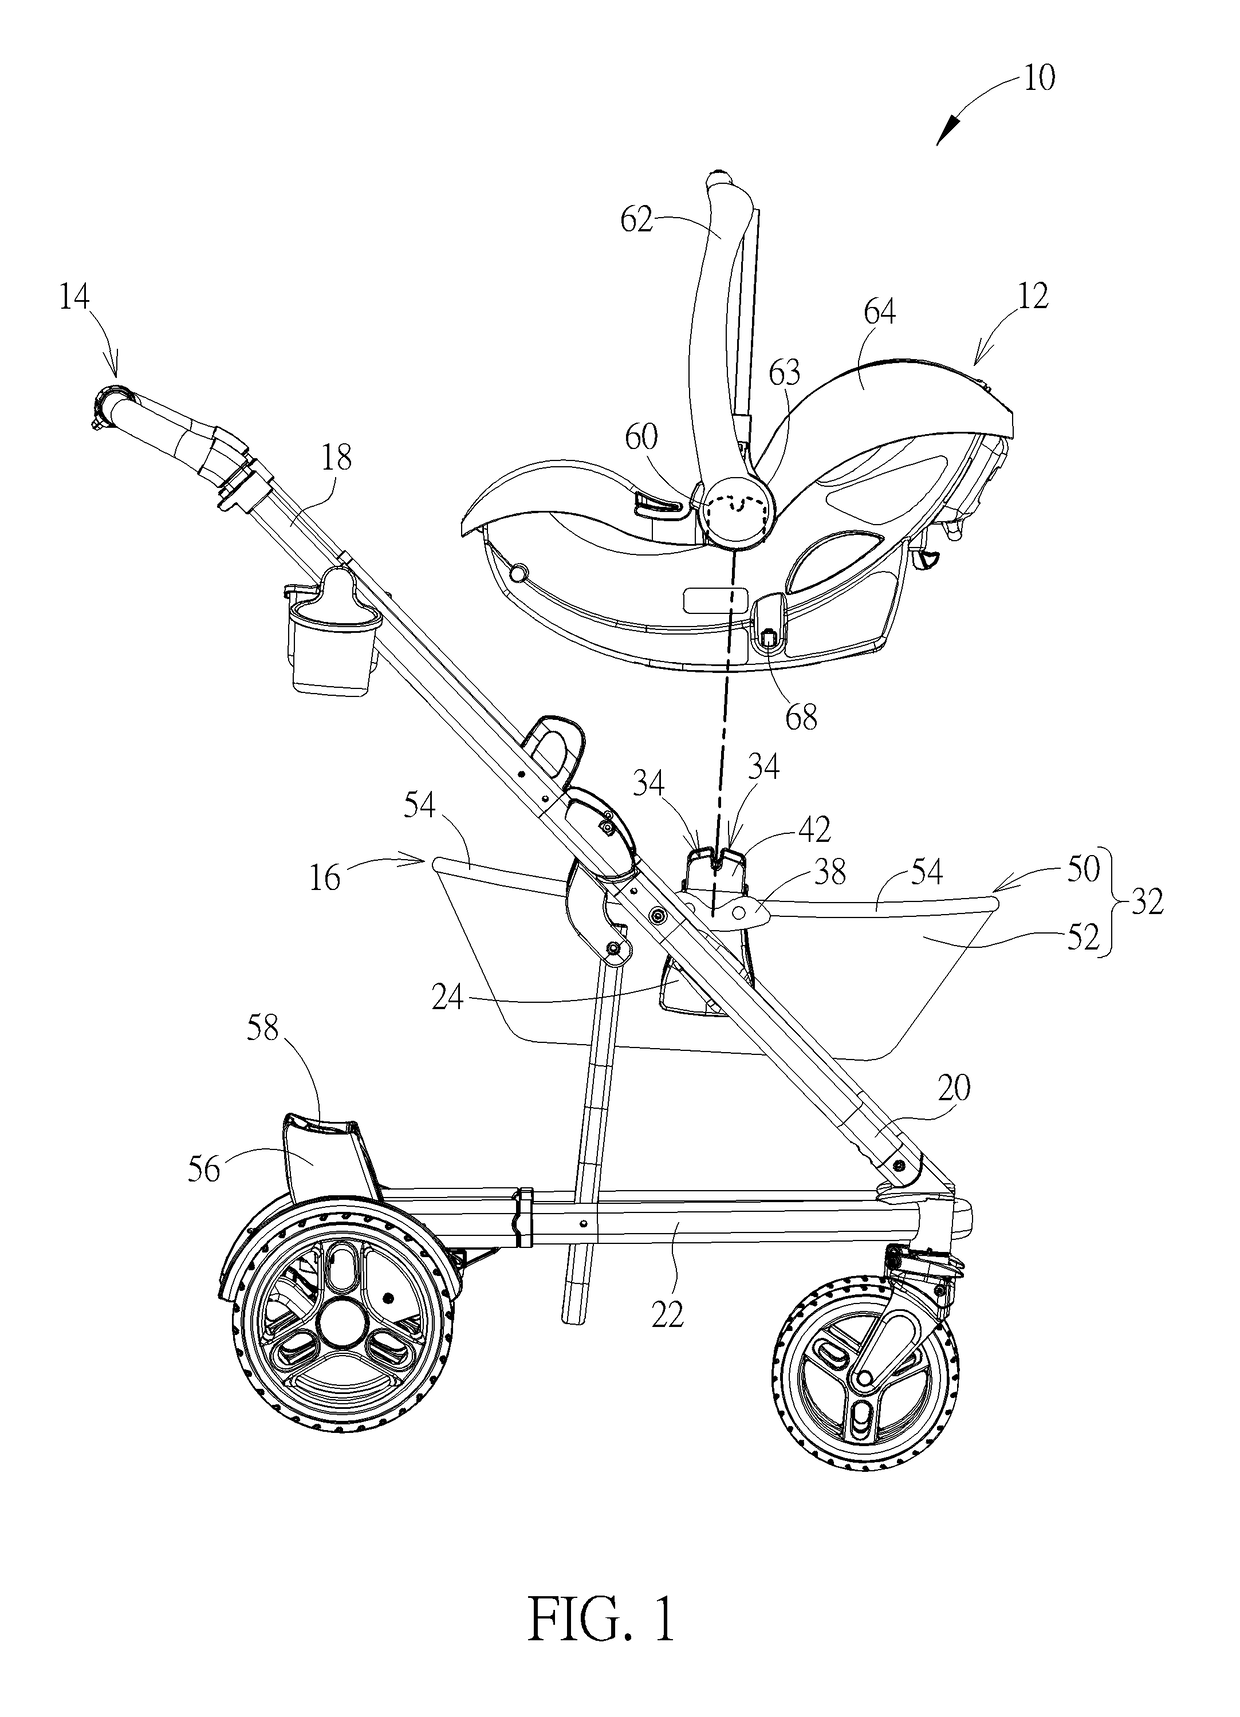 Basket and stroller apparatus thereof